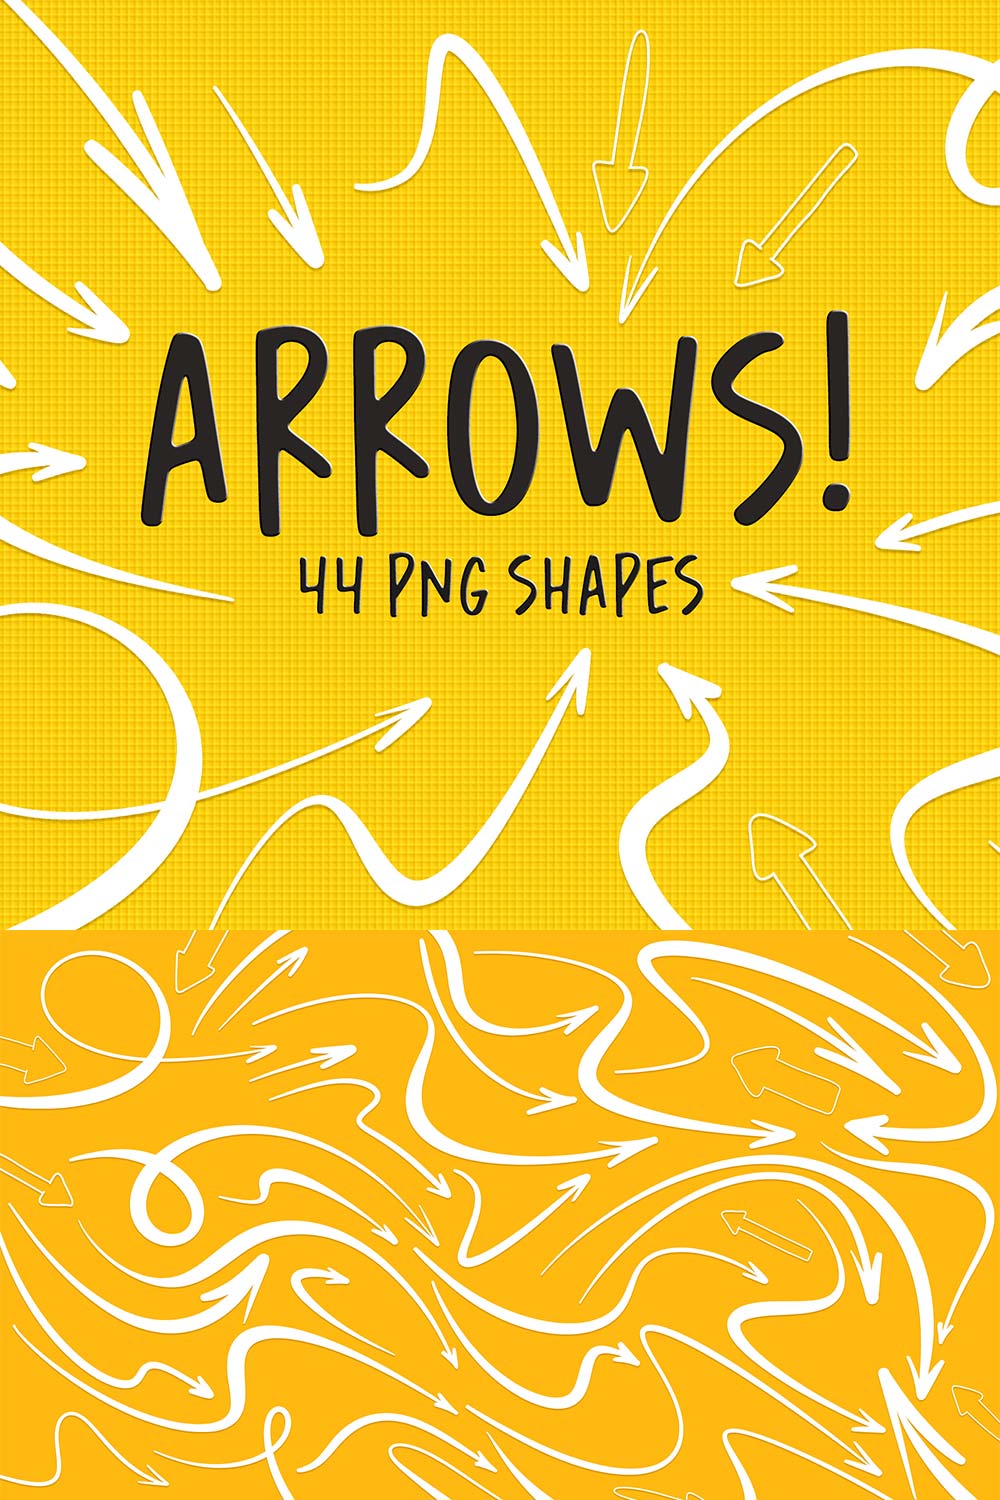 Hand drawn arrows pinterest preview image.